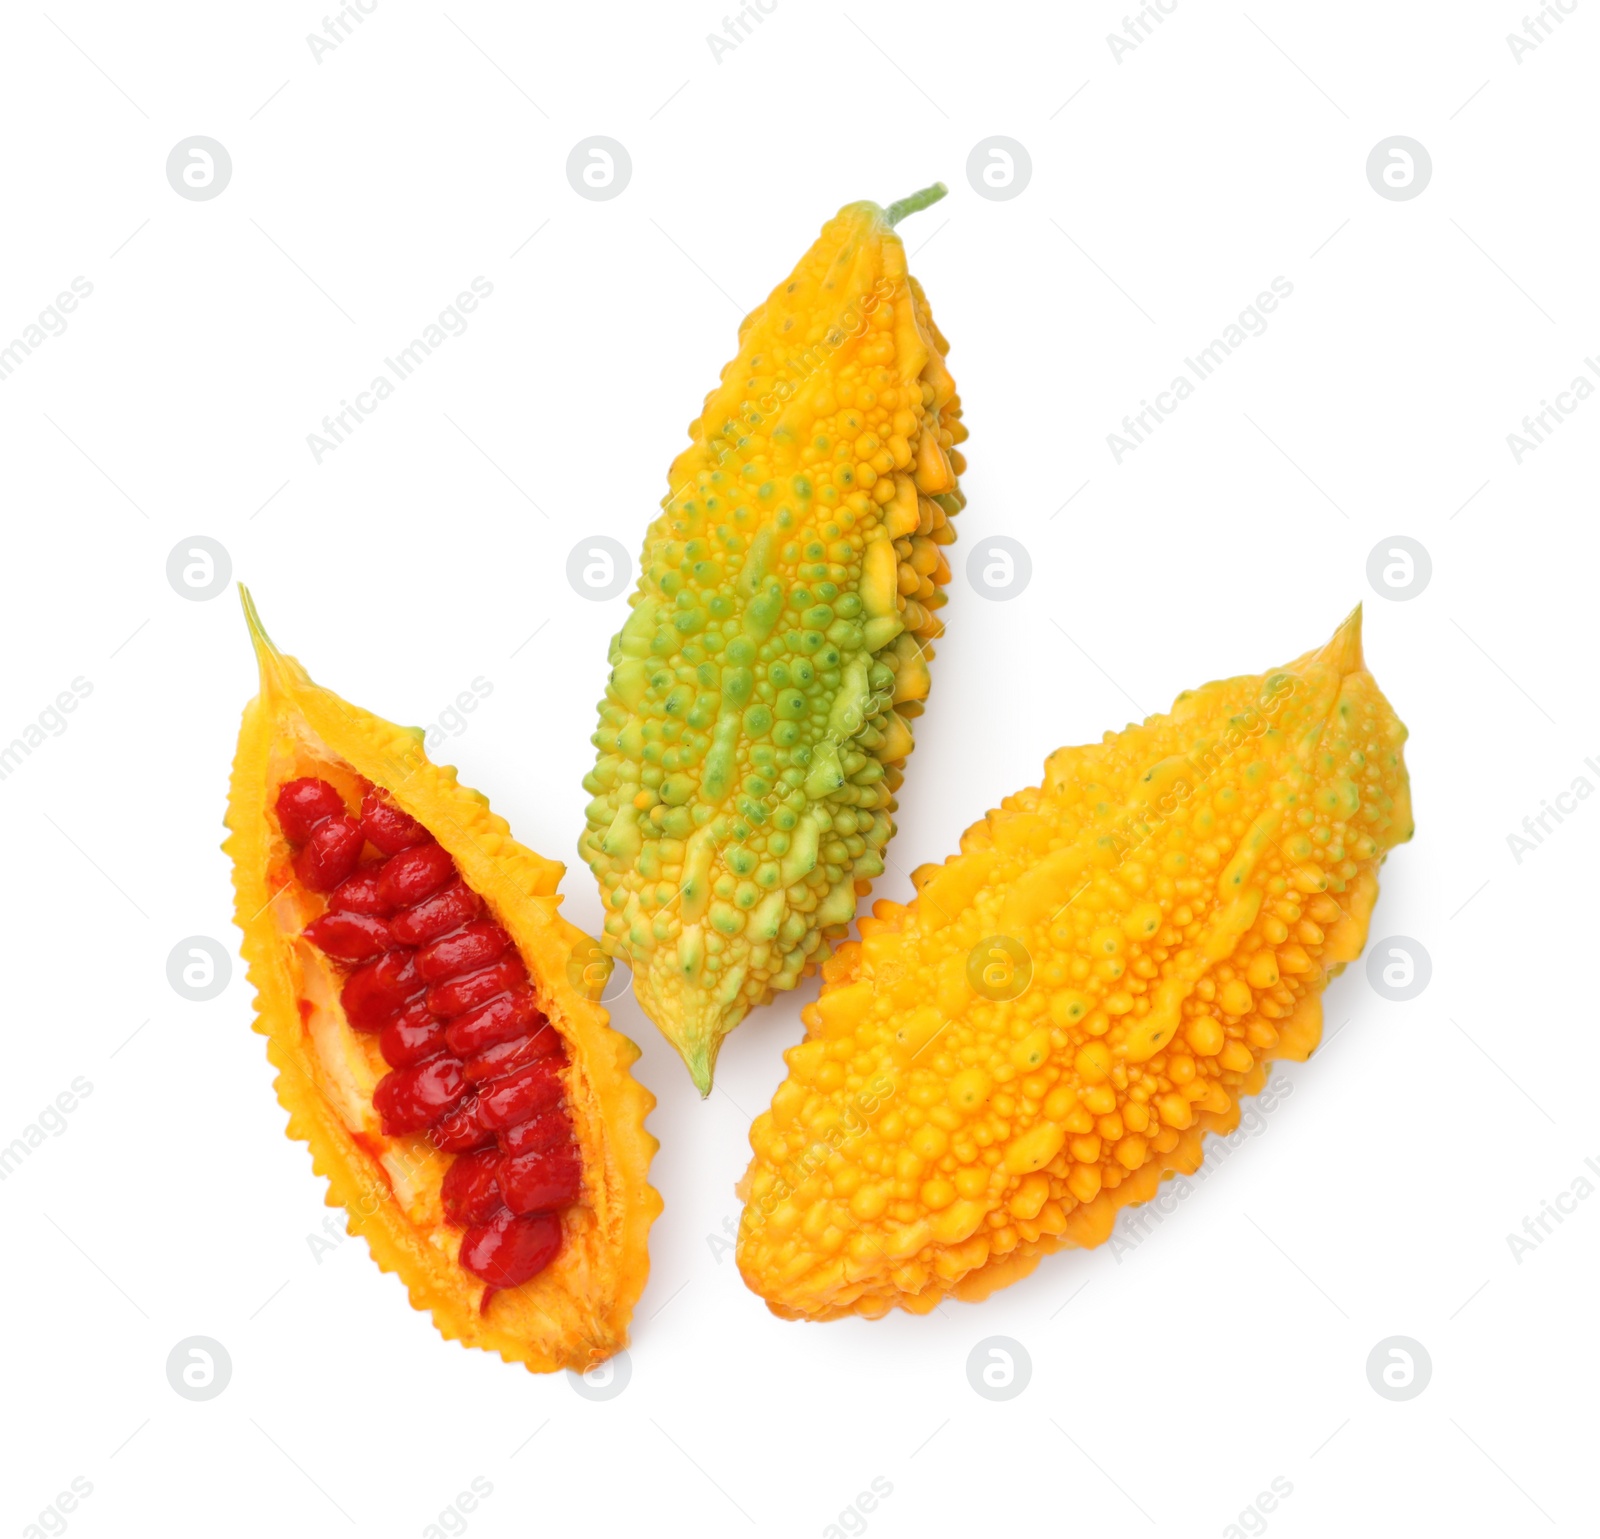 Photo of Whole and cut ripe bitter melons on white background, top view